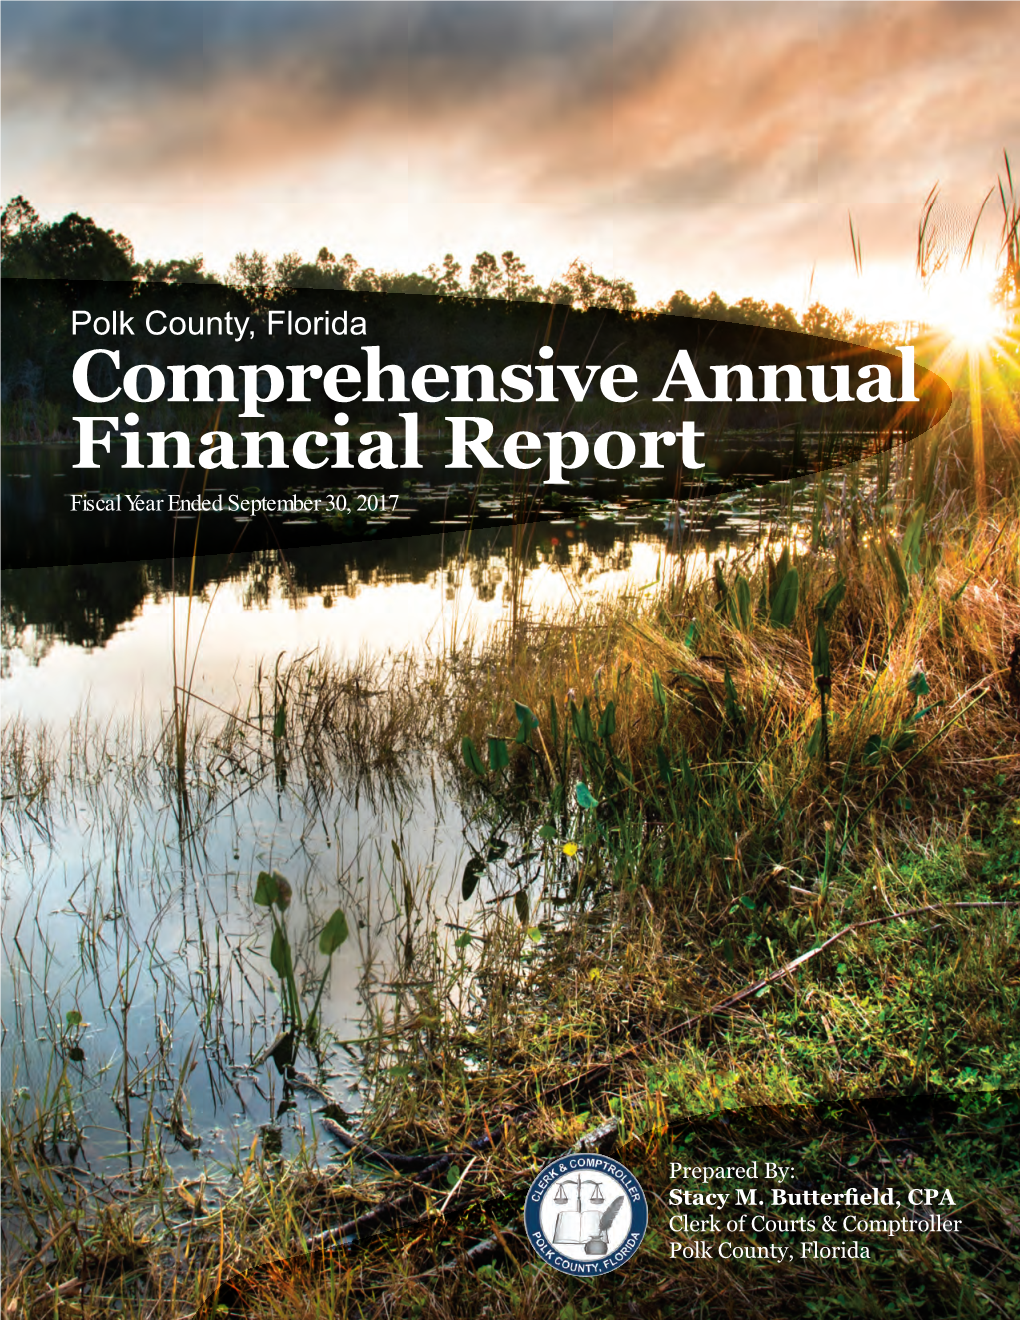 Polk County, Florida Comprehensive Annual Financial Report Fiscal Year Ended September 30, 2017